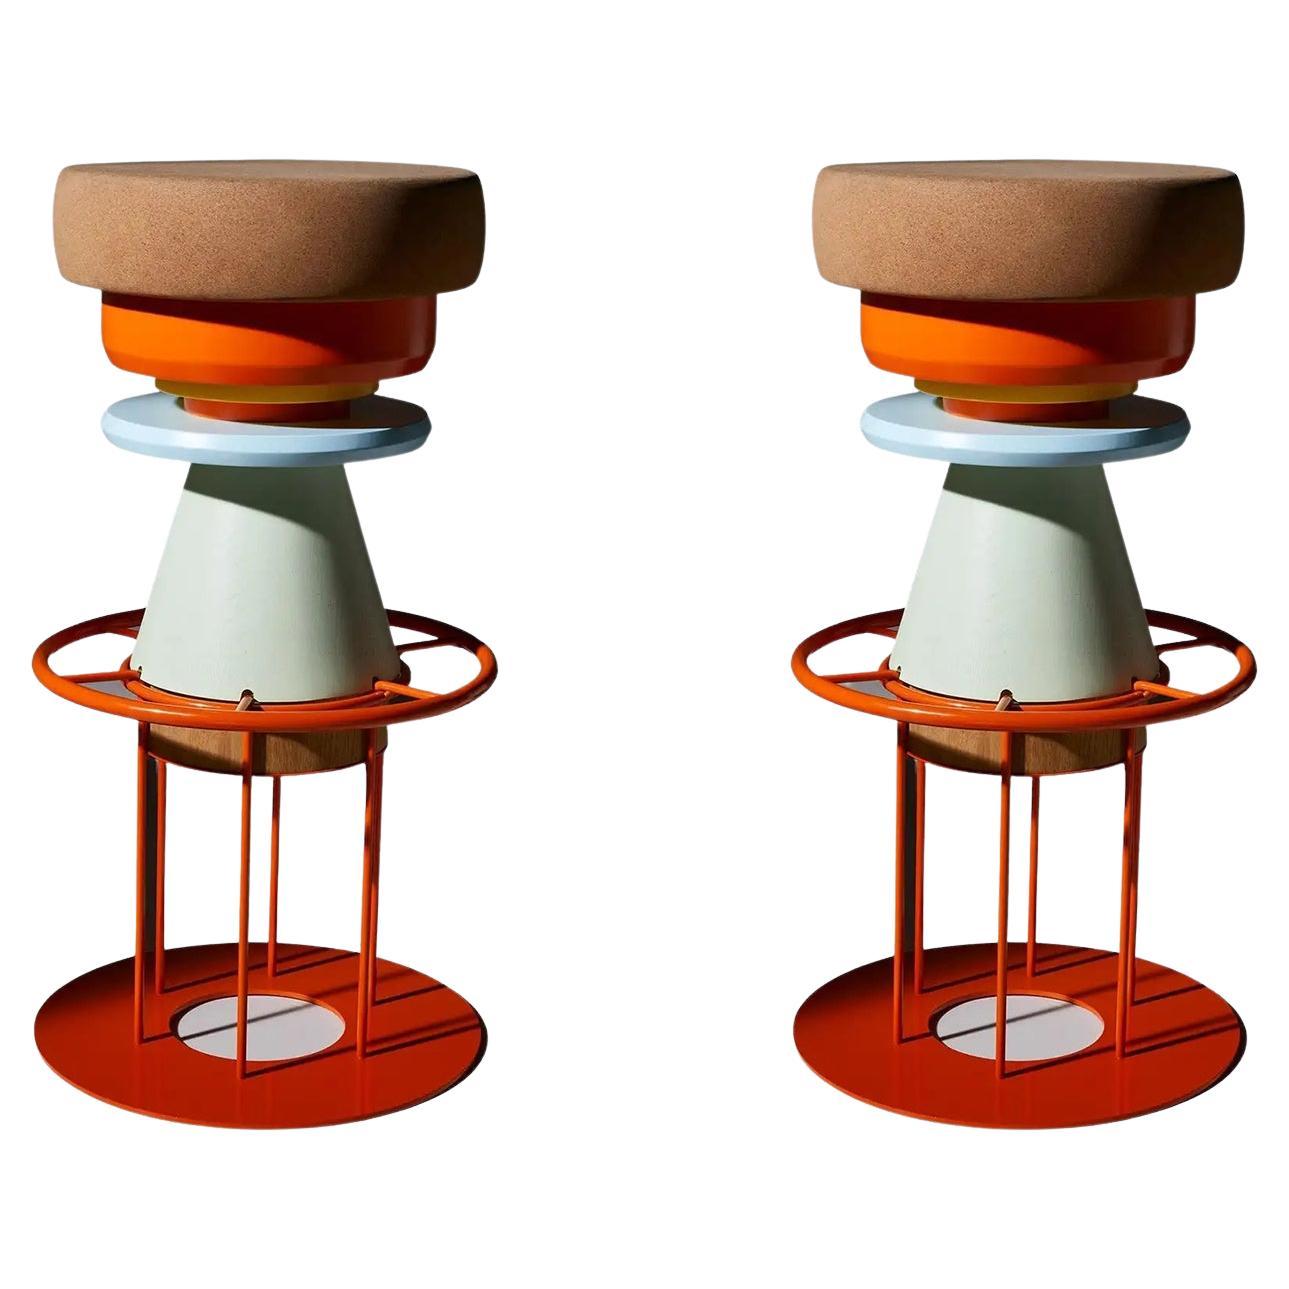 Set of 4 High Colorful tembo stool - Note Design Studio
Dimensions: D 36 x H 76 cm
Materials: Lacquered steel structure, solid wood (beech) and lacquered MDF, natural cork base.
Available in black and 3 sizes: H46, H64, H76 cm.

Tembo is a